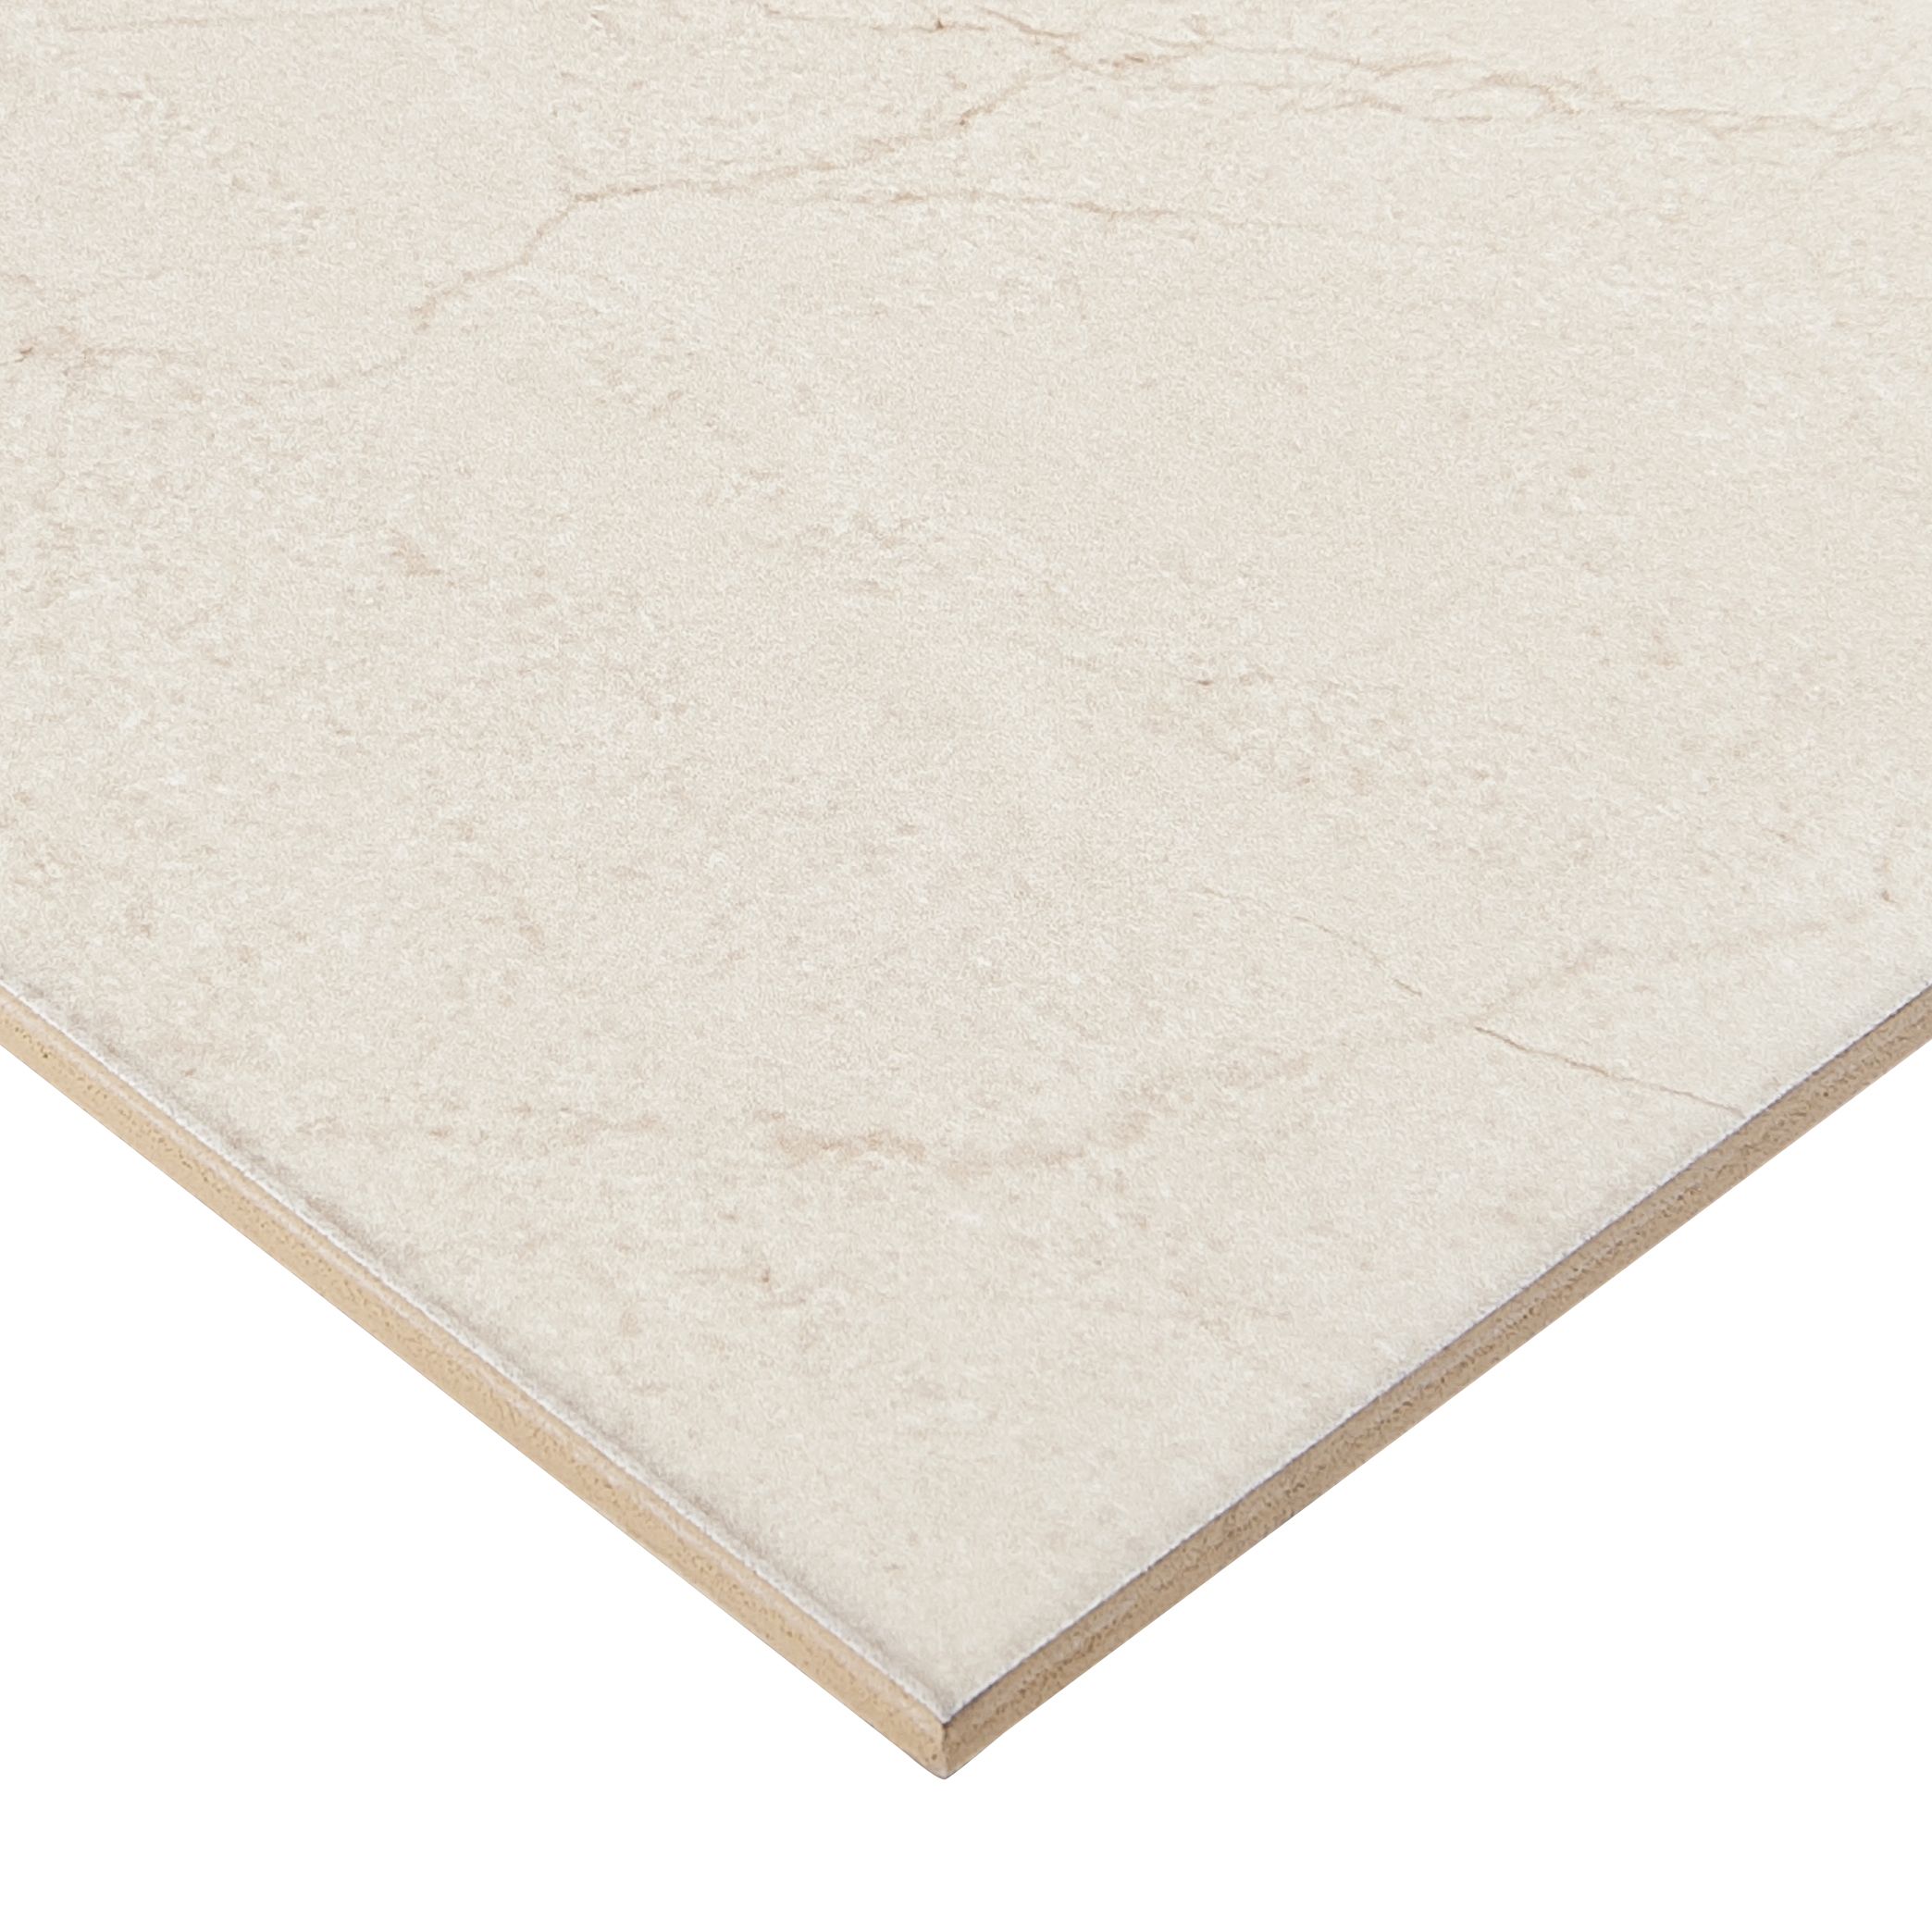 Elegance marble Cream Gloss Marble effect Ceramic Wall Tile, Pack of 7, (L)600mm (W)200mm